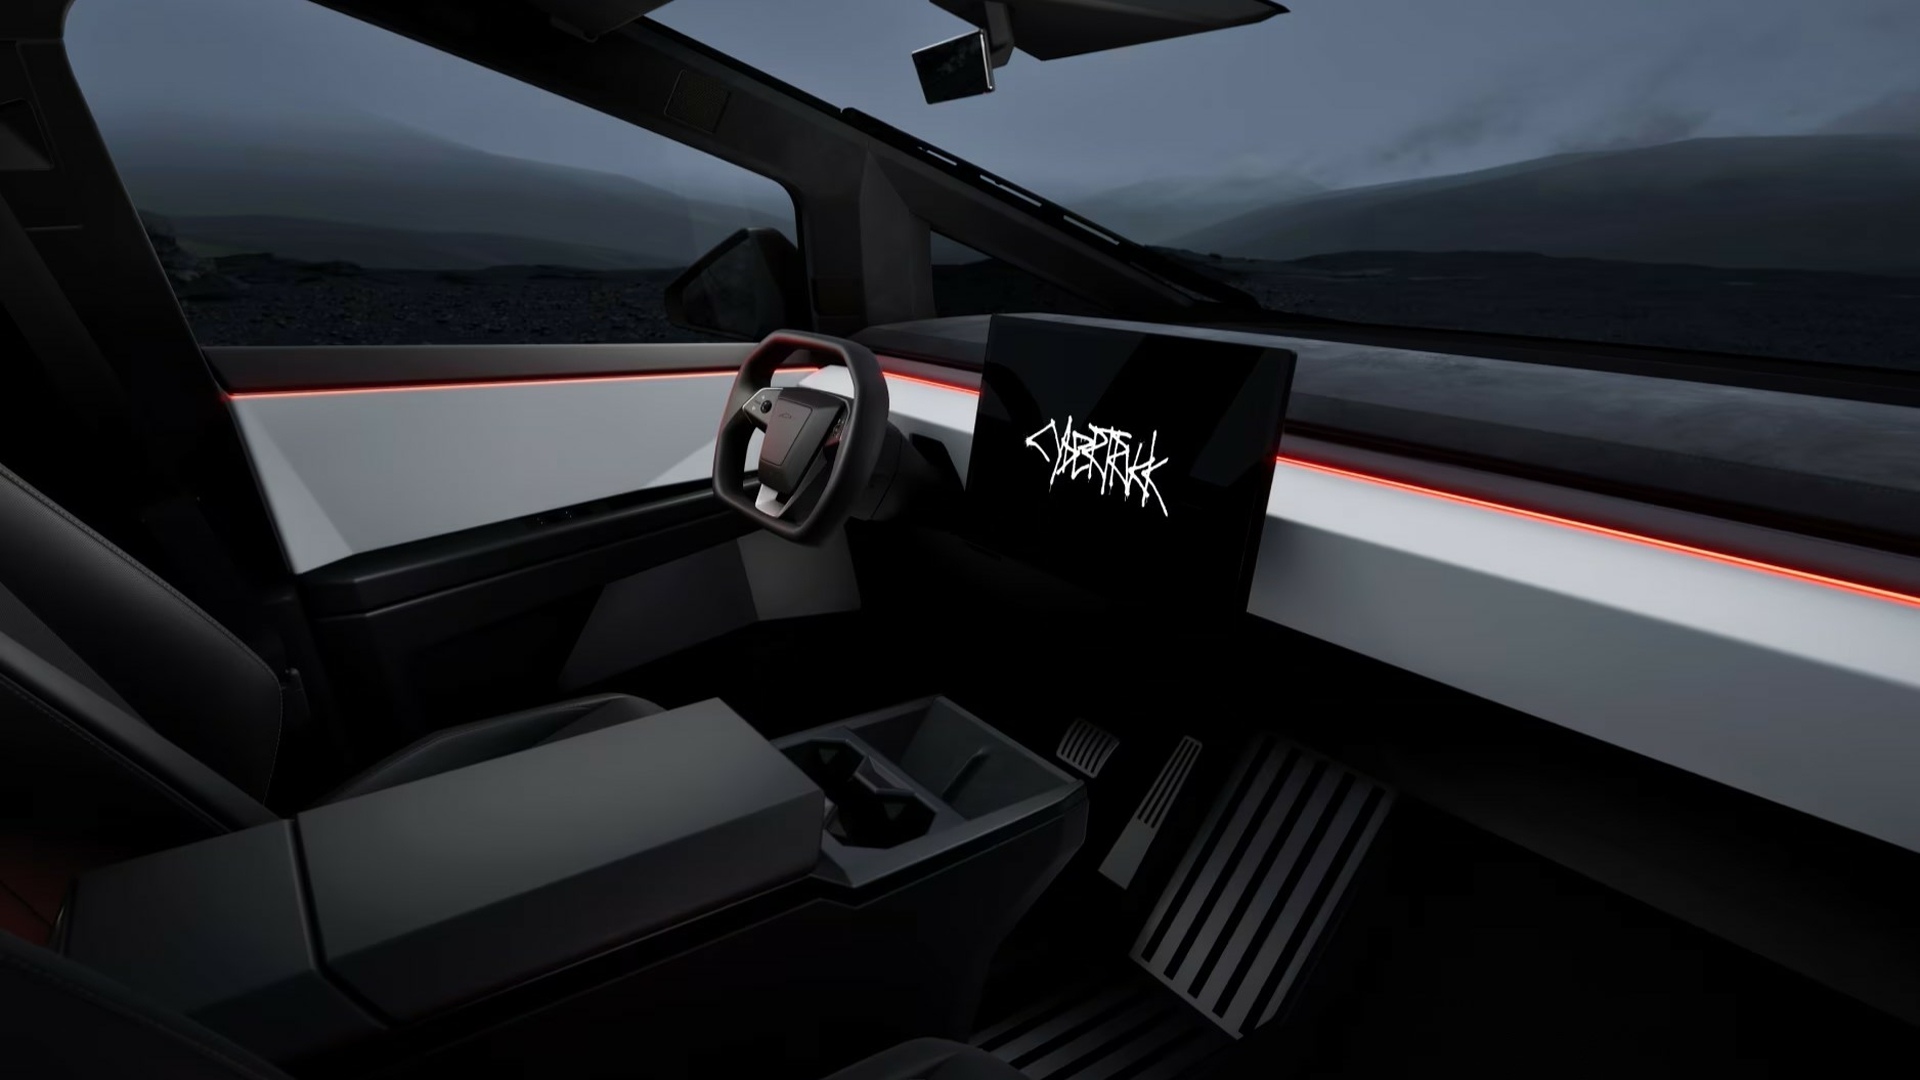 The Steering And Dashboard Of The Tesla Cybertruck